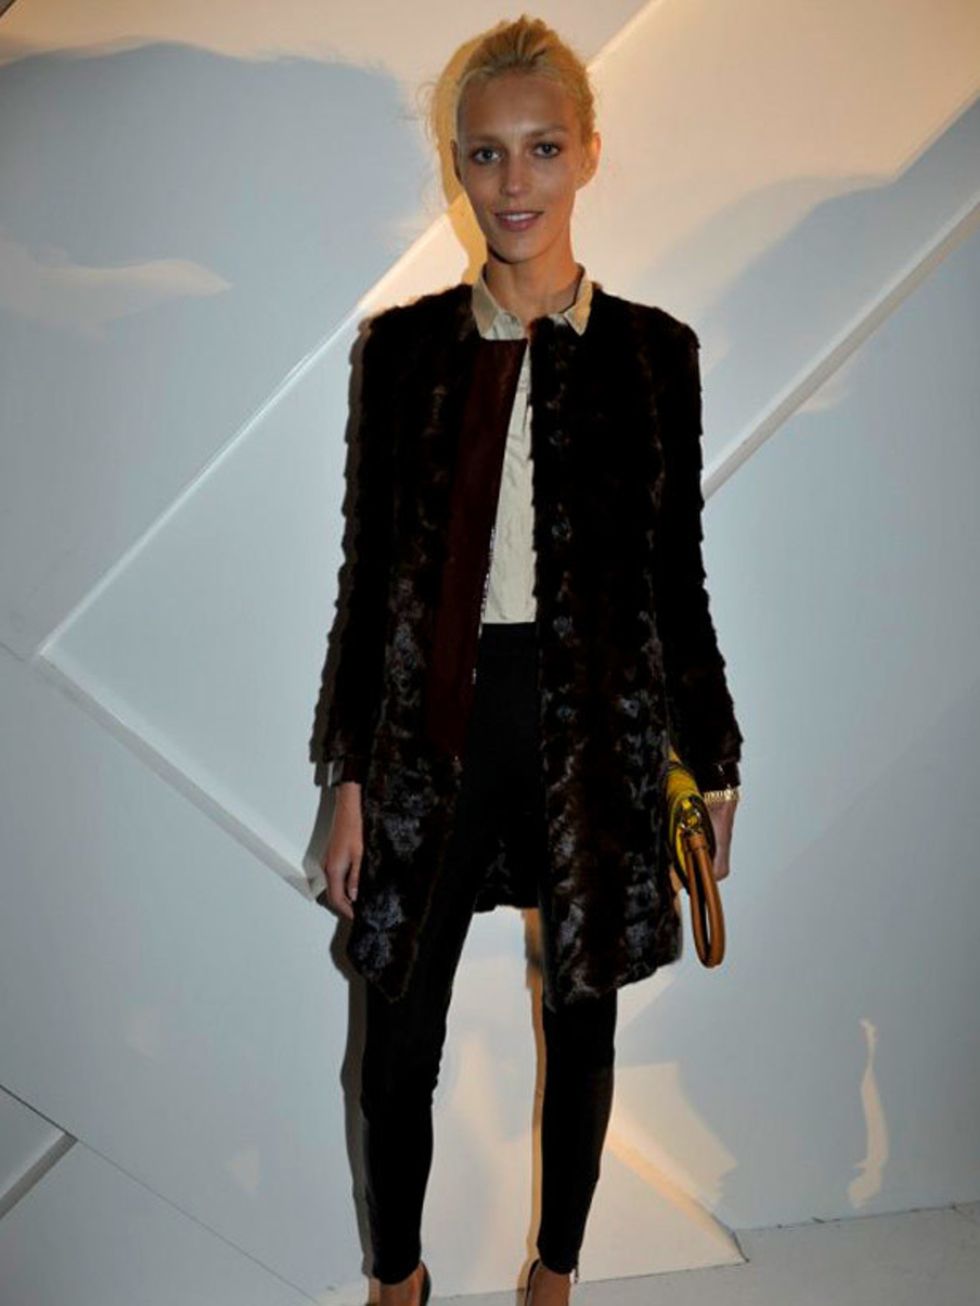 <p><a href="http://www.elleuk.com/catwalk/collections/burberry-prorsum/">Anja Rubik</a> attended the opening of Burberry's new flagship store in Paris.</p>